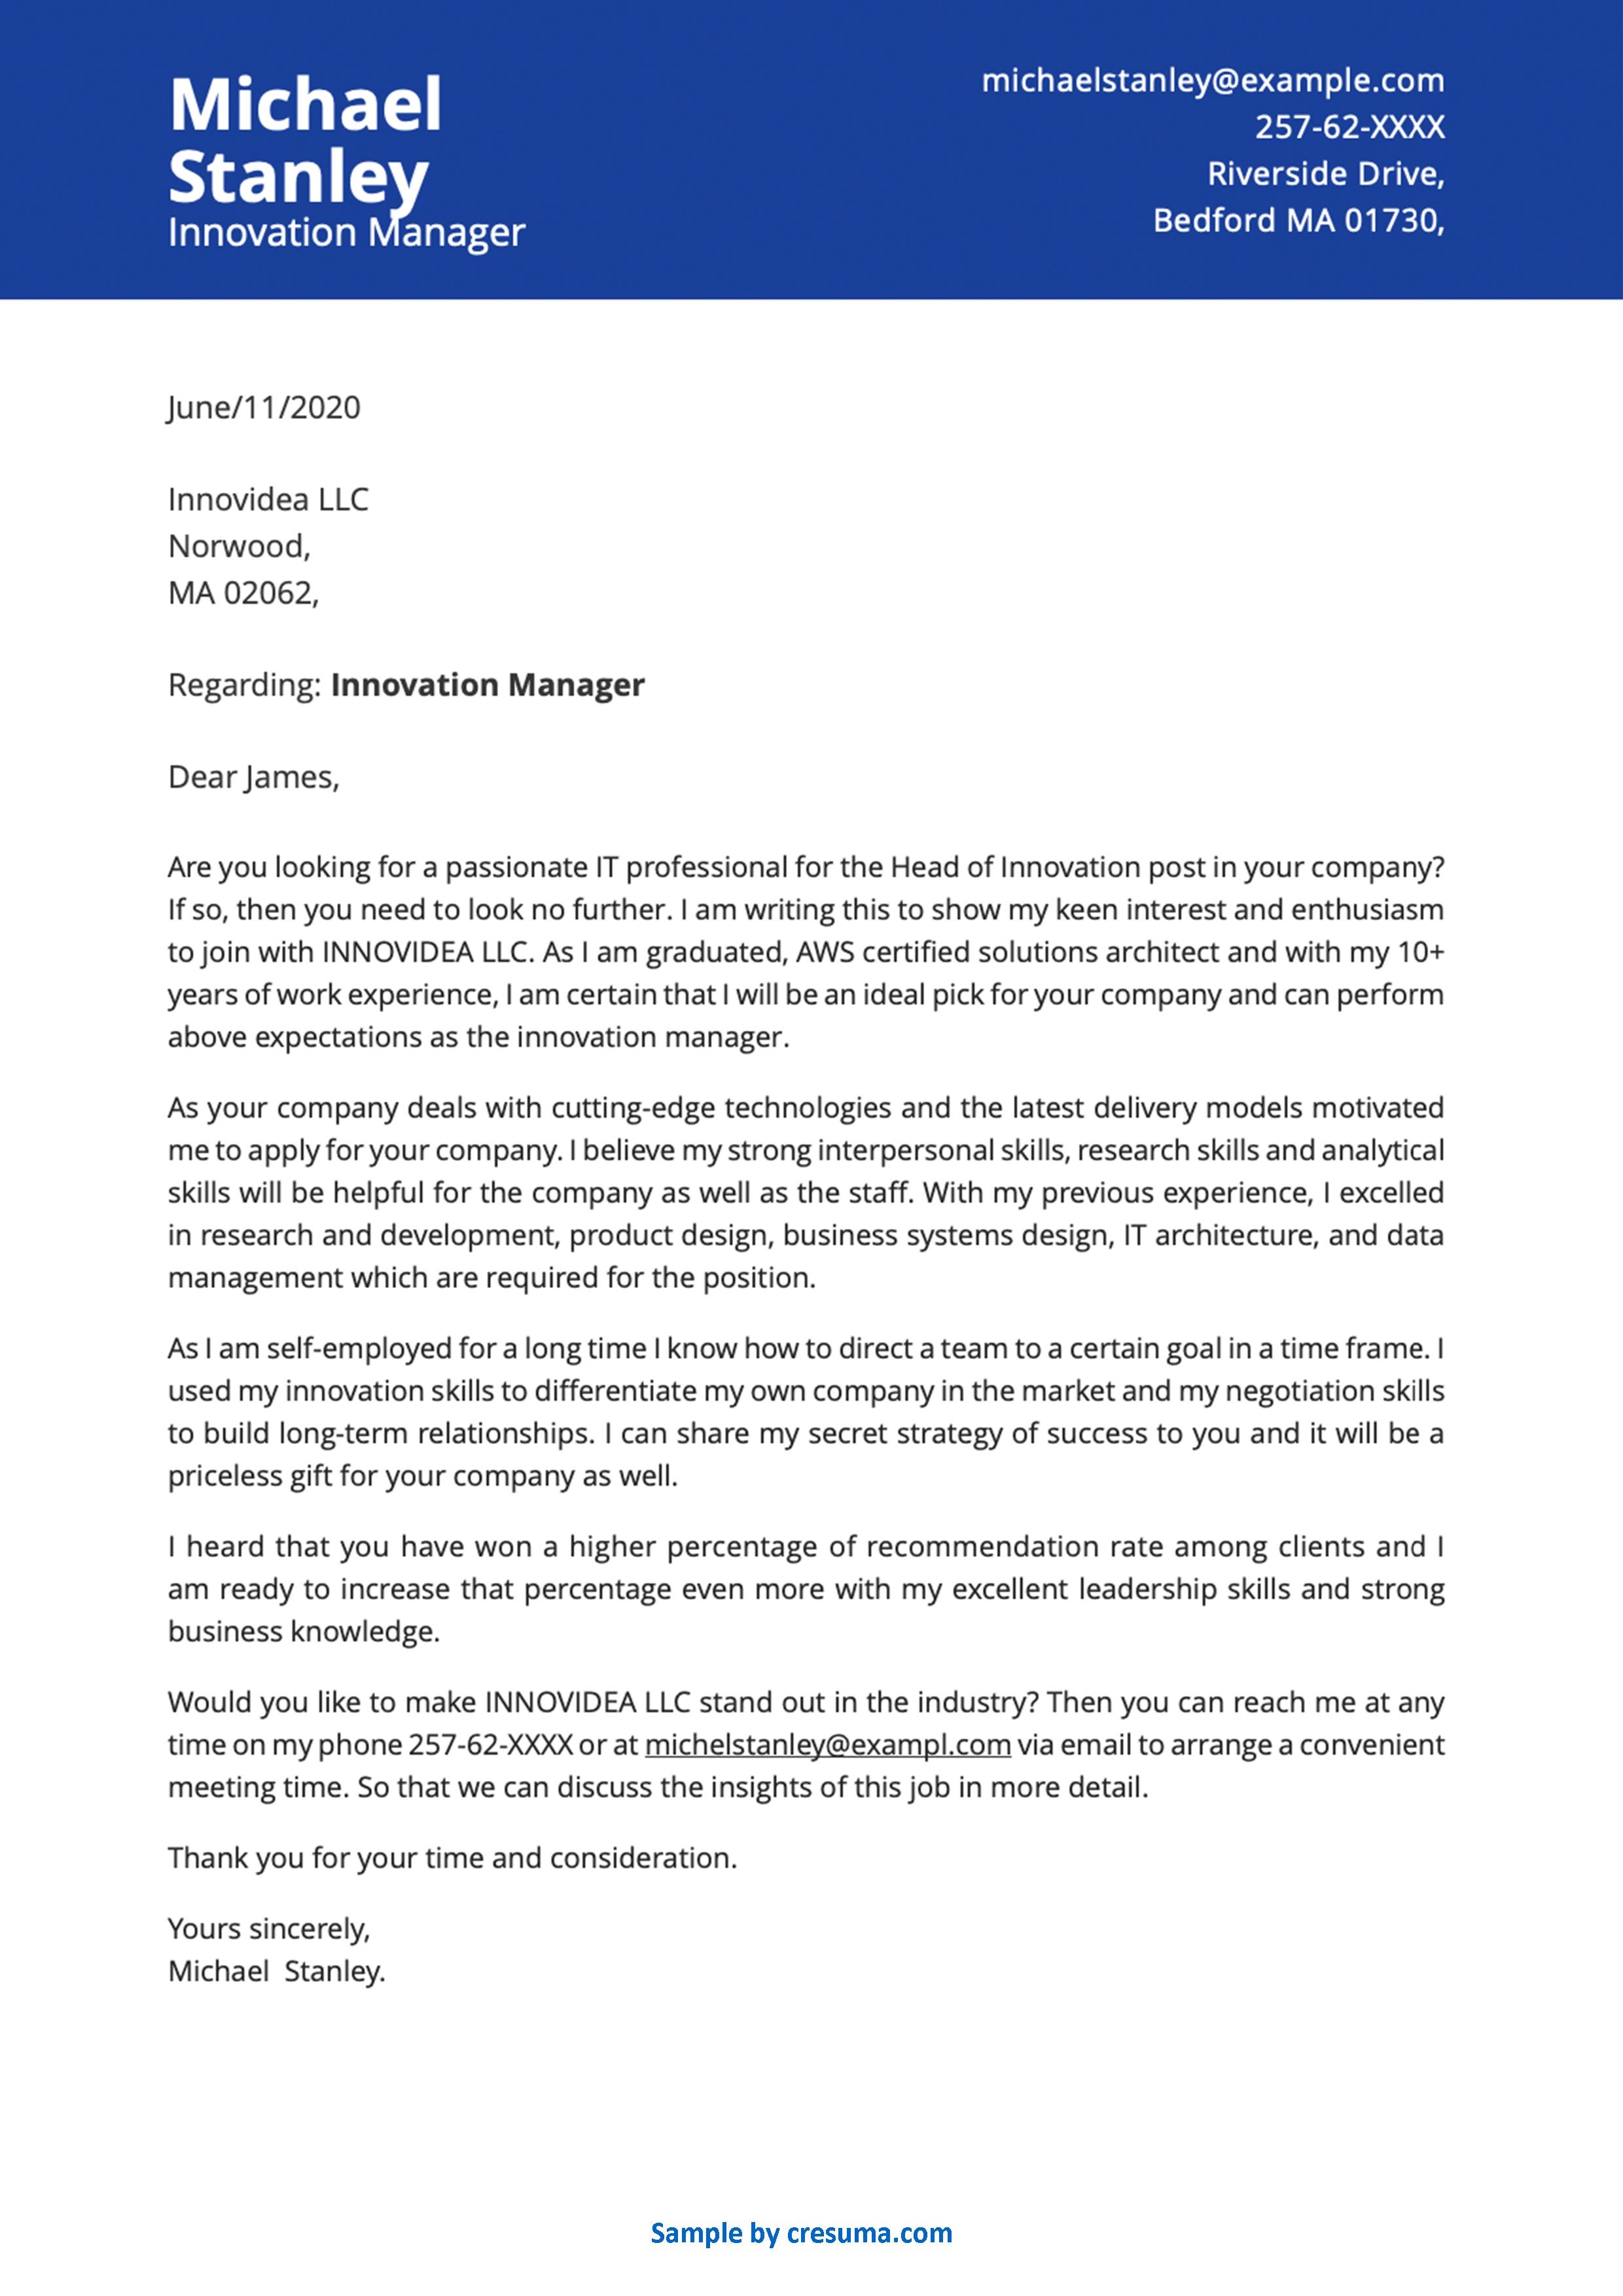 Innovation Manager cover letter example image